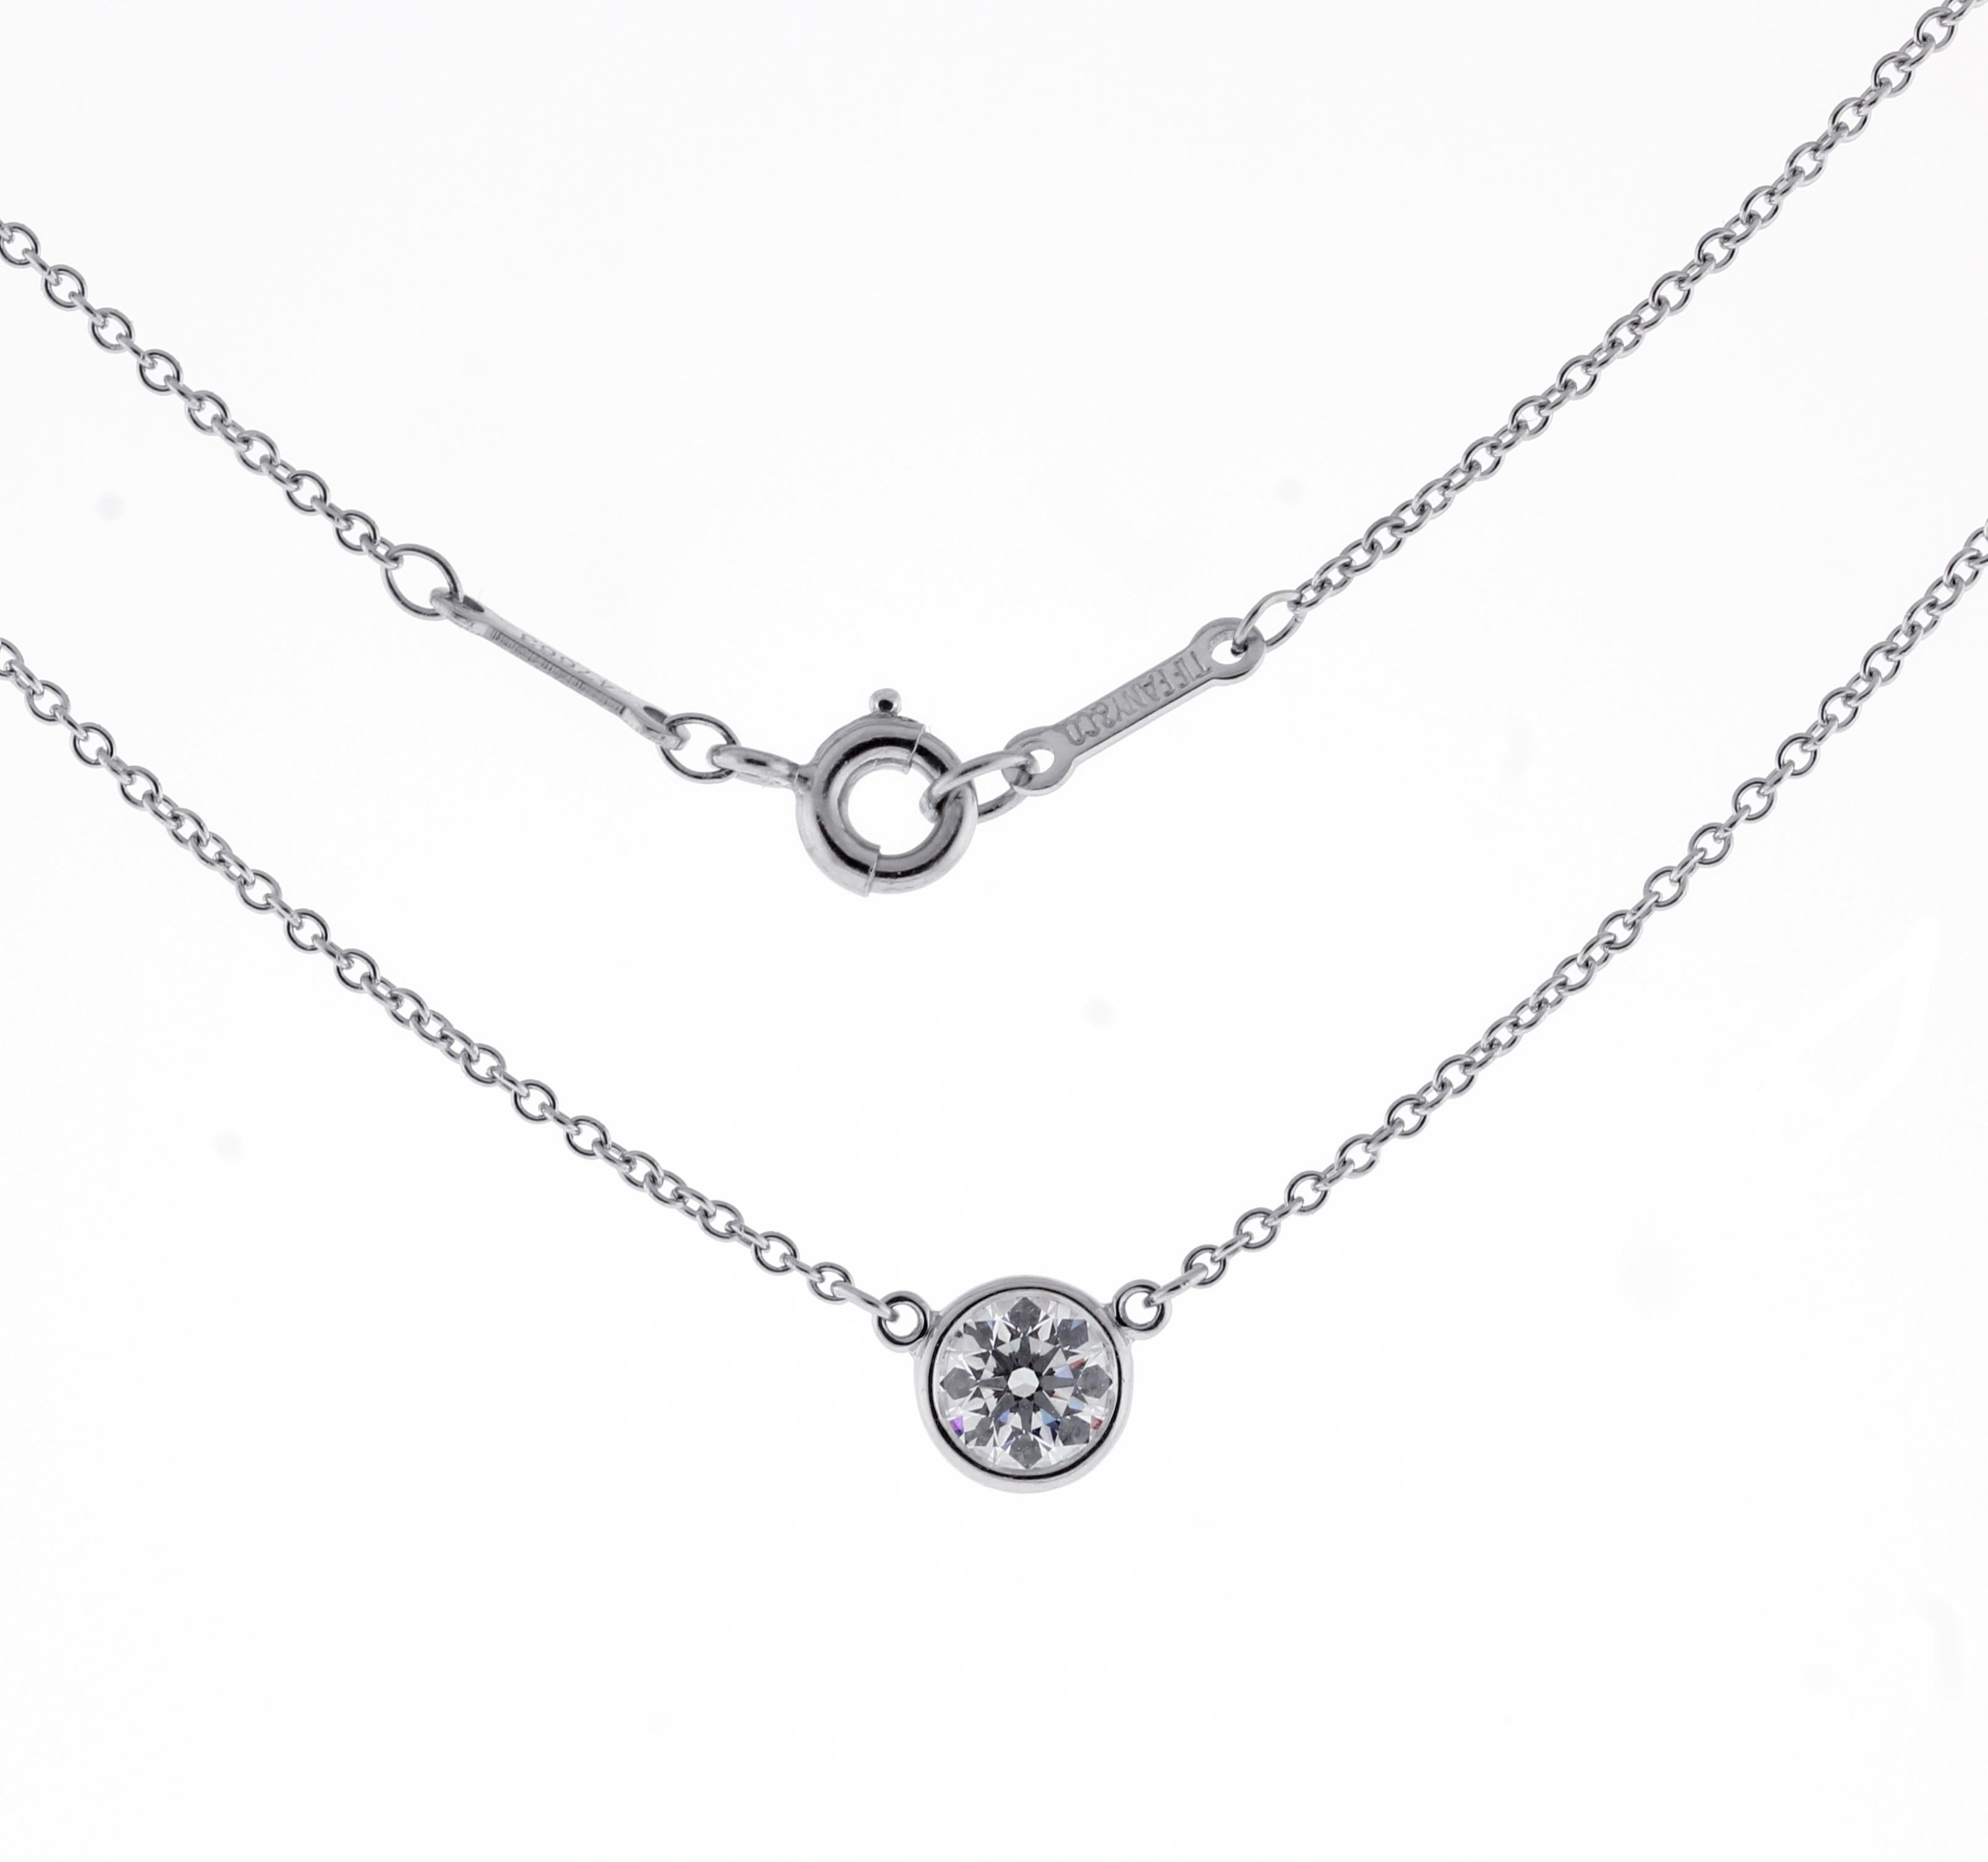 From Tiffany & Co's acclaimed designer Elsa Peretti diamond by the yard collection and diamond pendent.
Designer: Tiffany & Co.
♦ Metal: Platinum
♦ Diamond=.35 carats G-H color, VS clarity
♦ Circa 1999
♦  16 inch necklace
♦  Tiffany Box
♦ Condition: